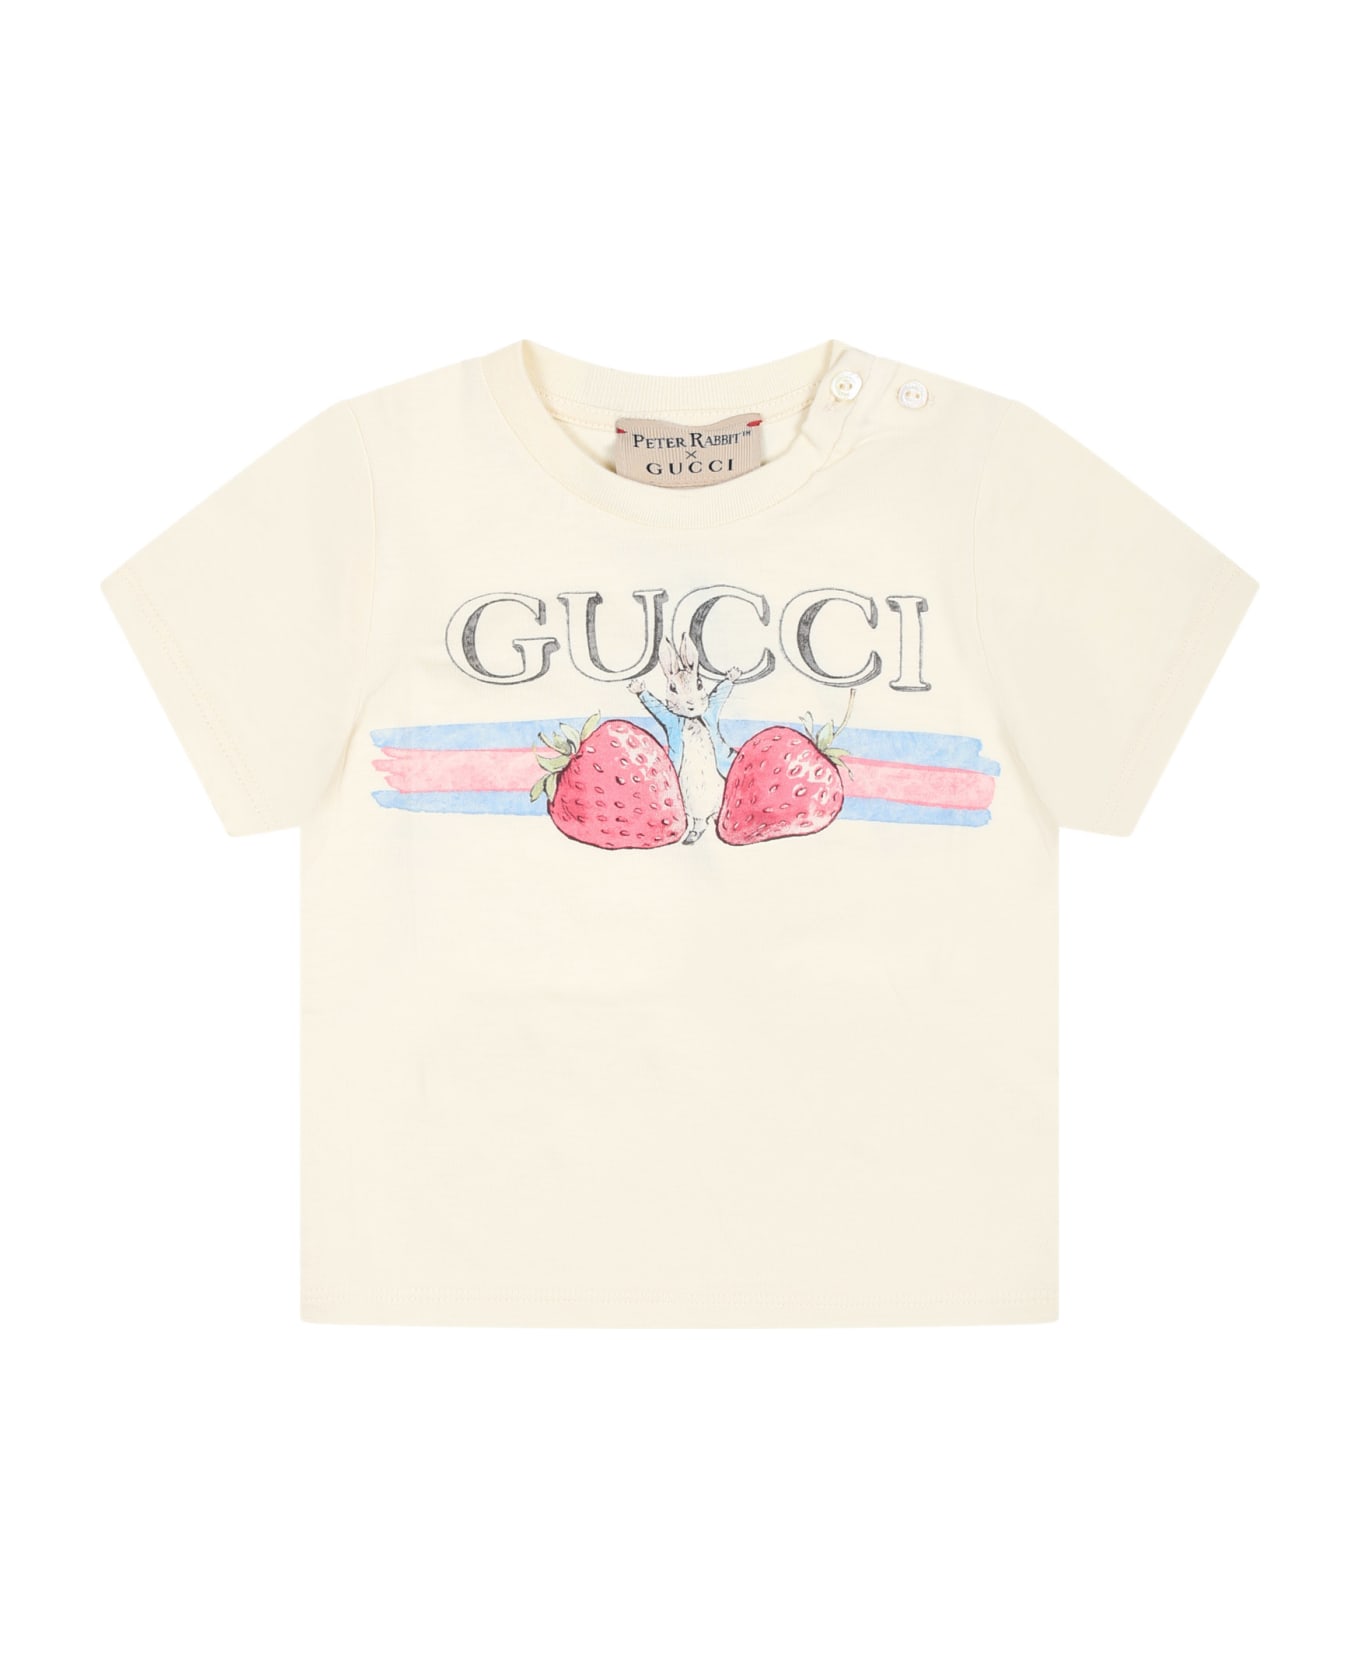 Gucci Ivory T-shirt For Baby Girl With Peter Rabbit - Yellow